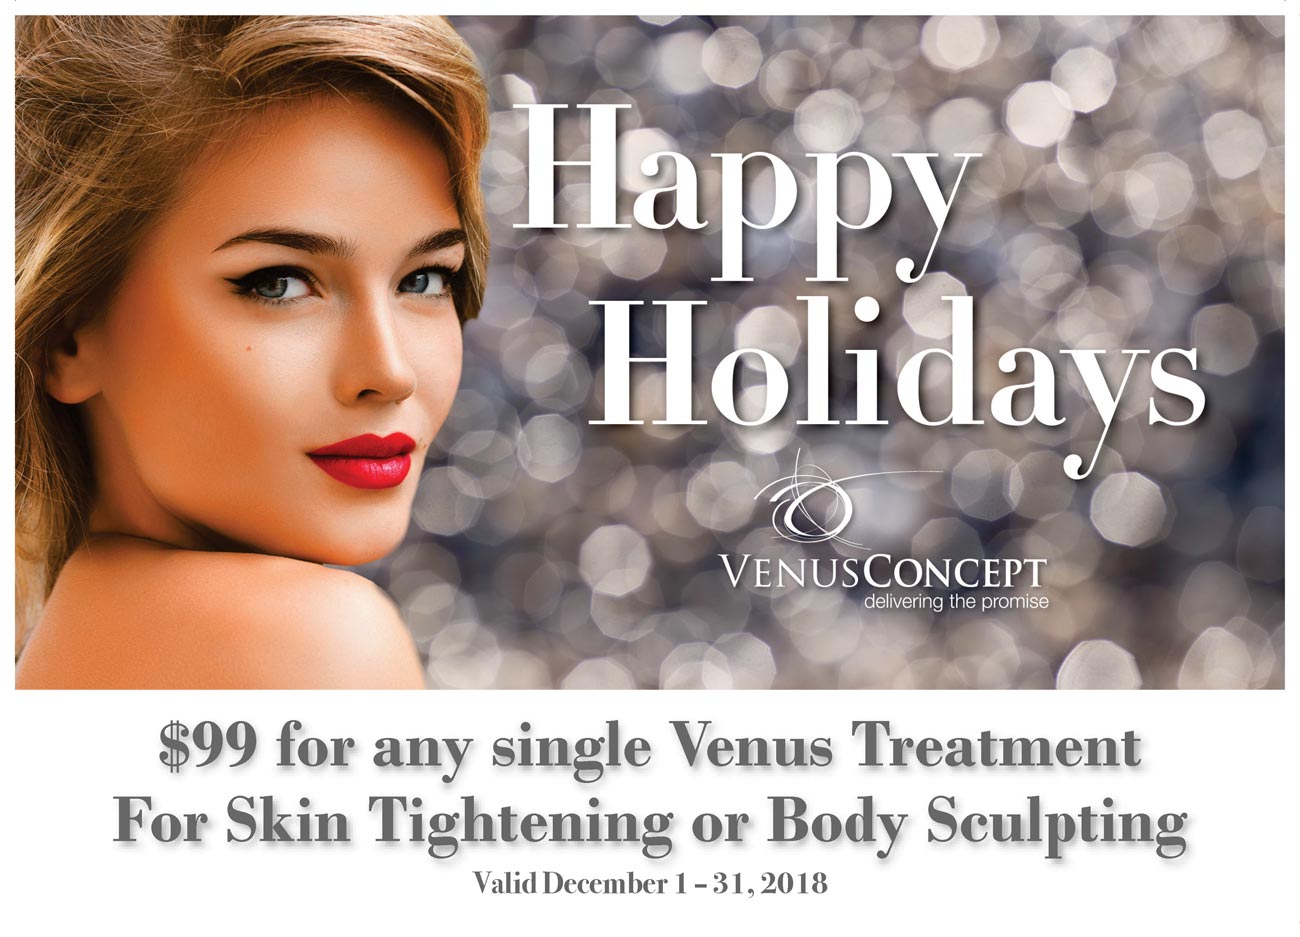 Skin tightening or body sculpting special